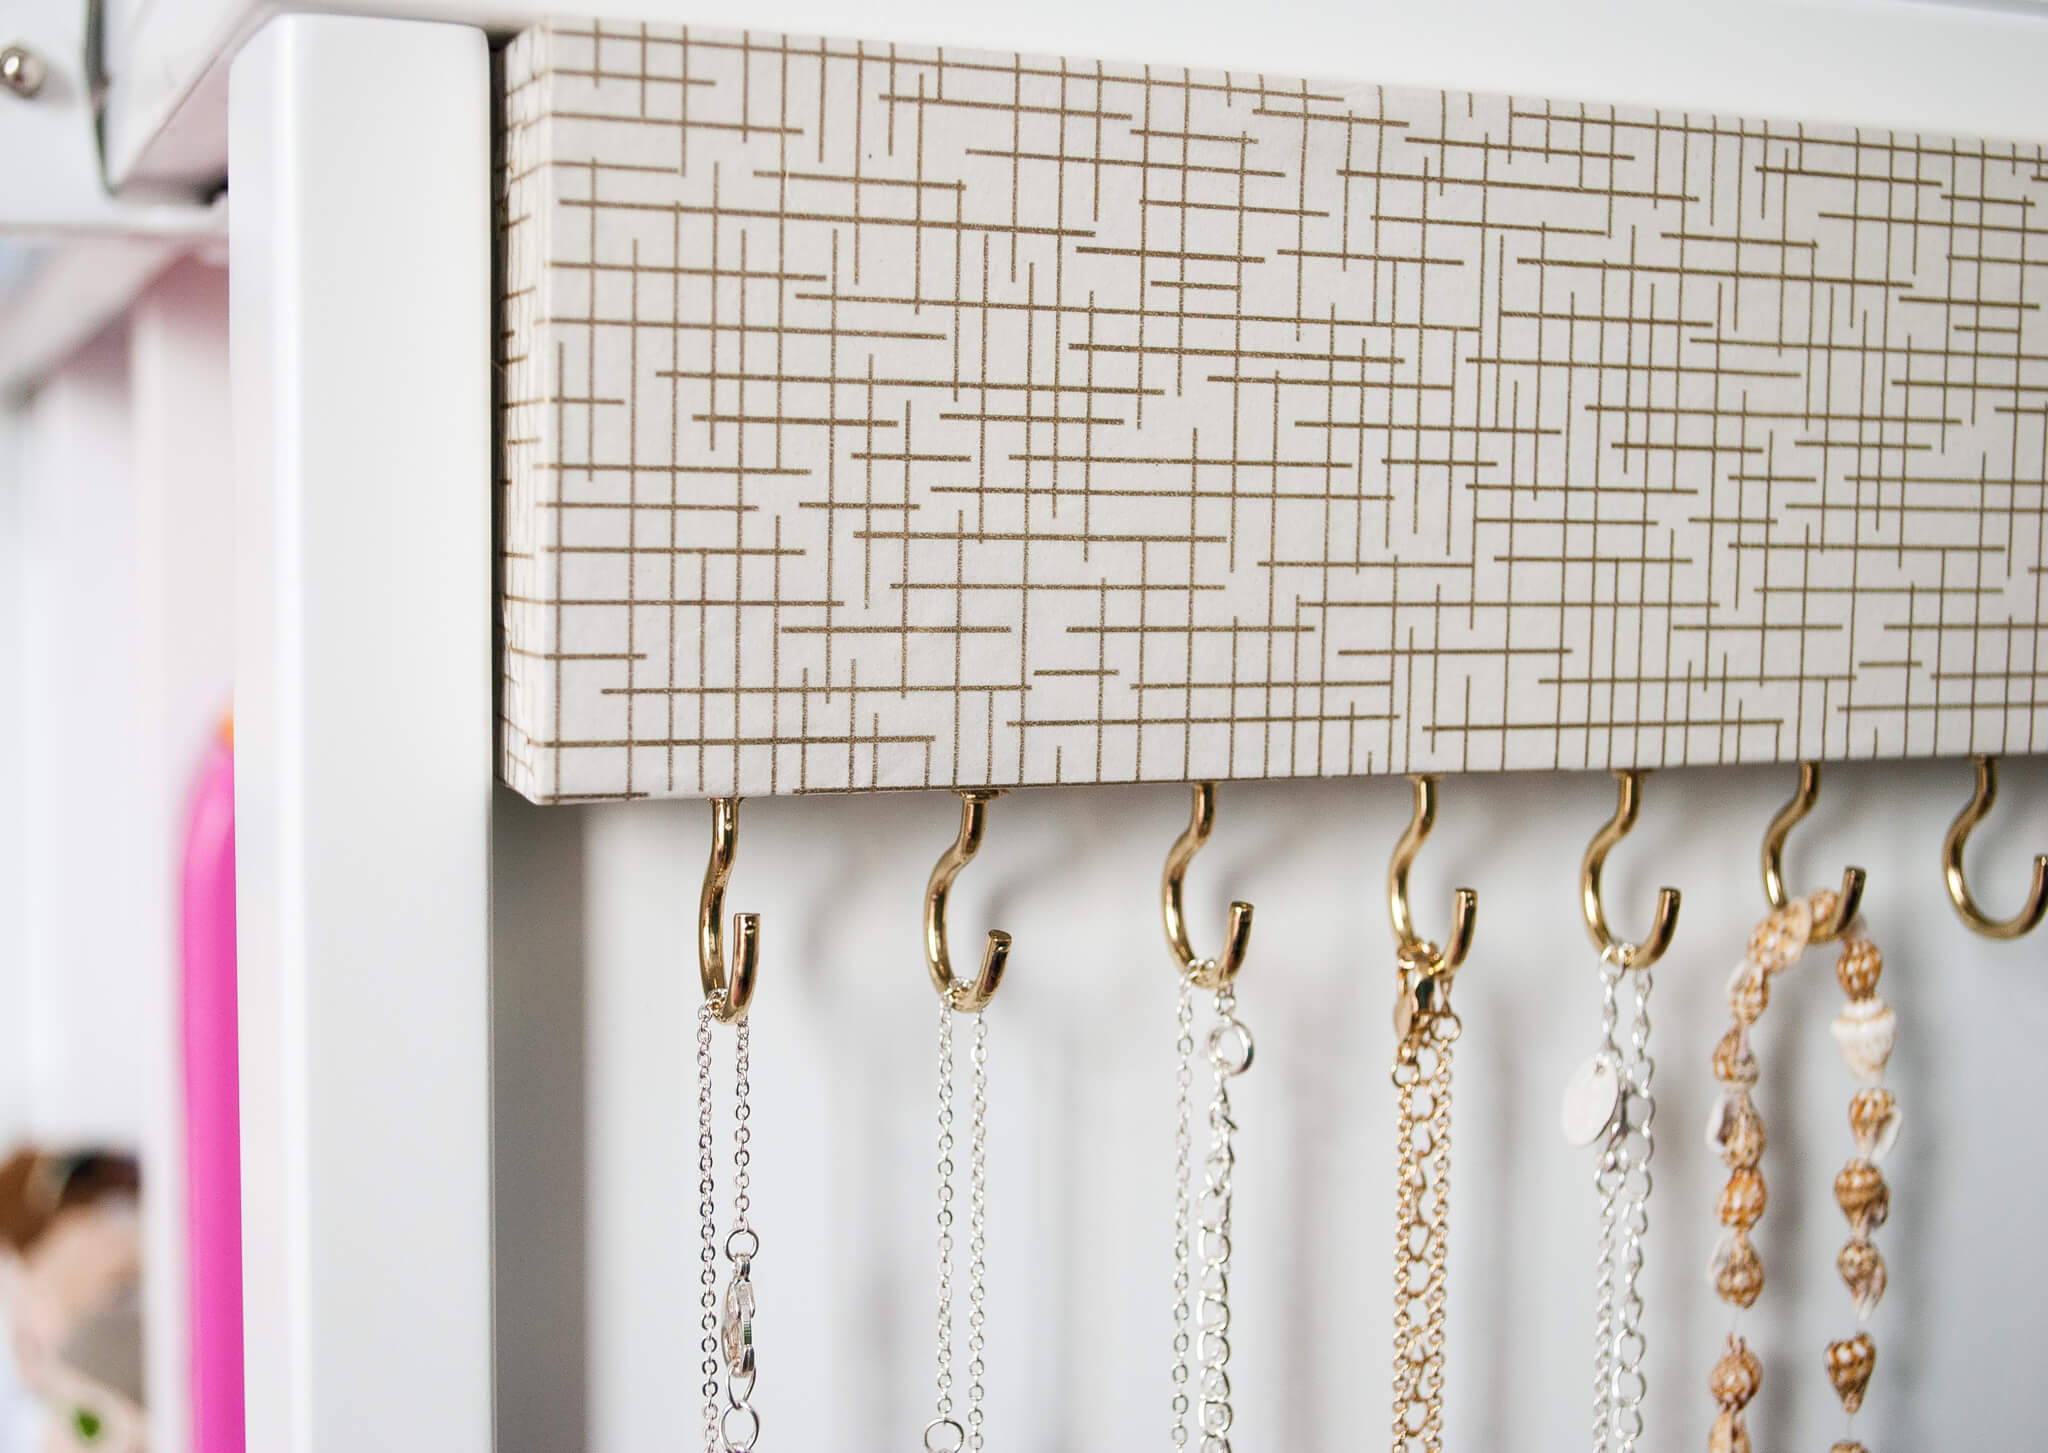 How to make an easy DIY jewelry organizer. Takes just a couple hours to create. No more tangled necklaces!